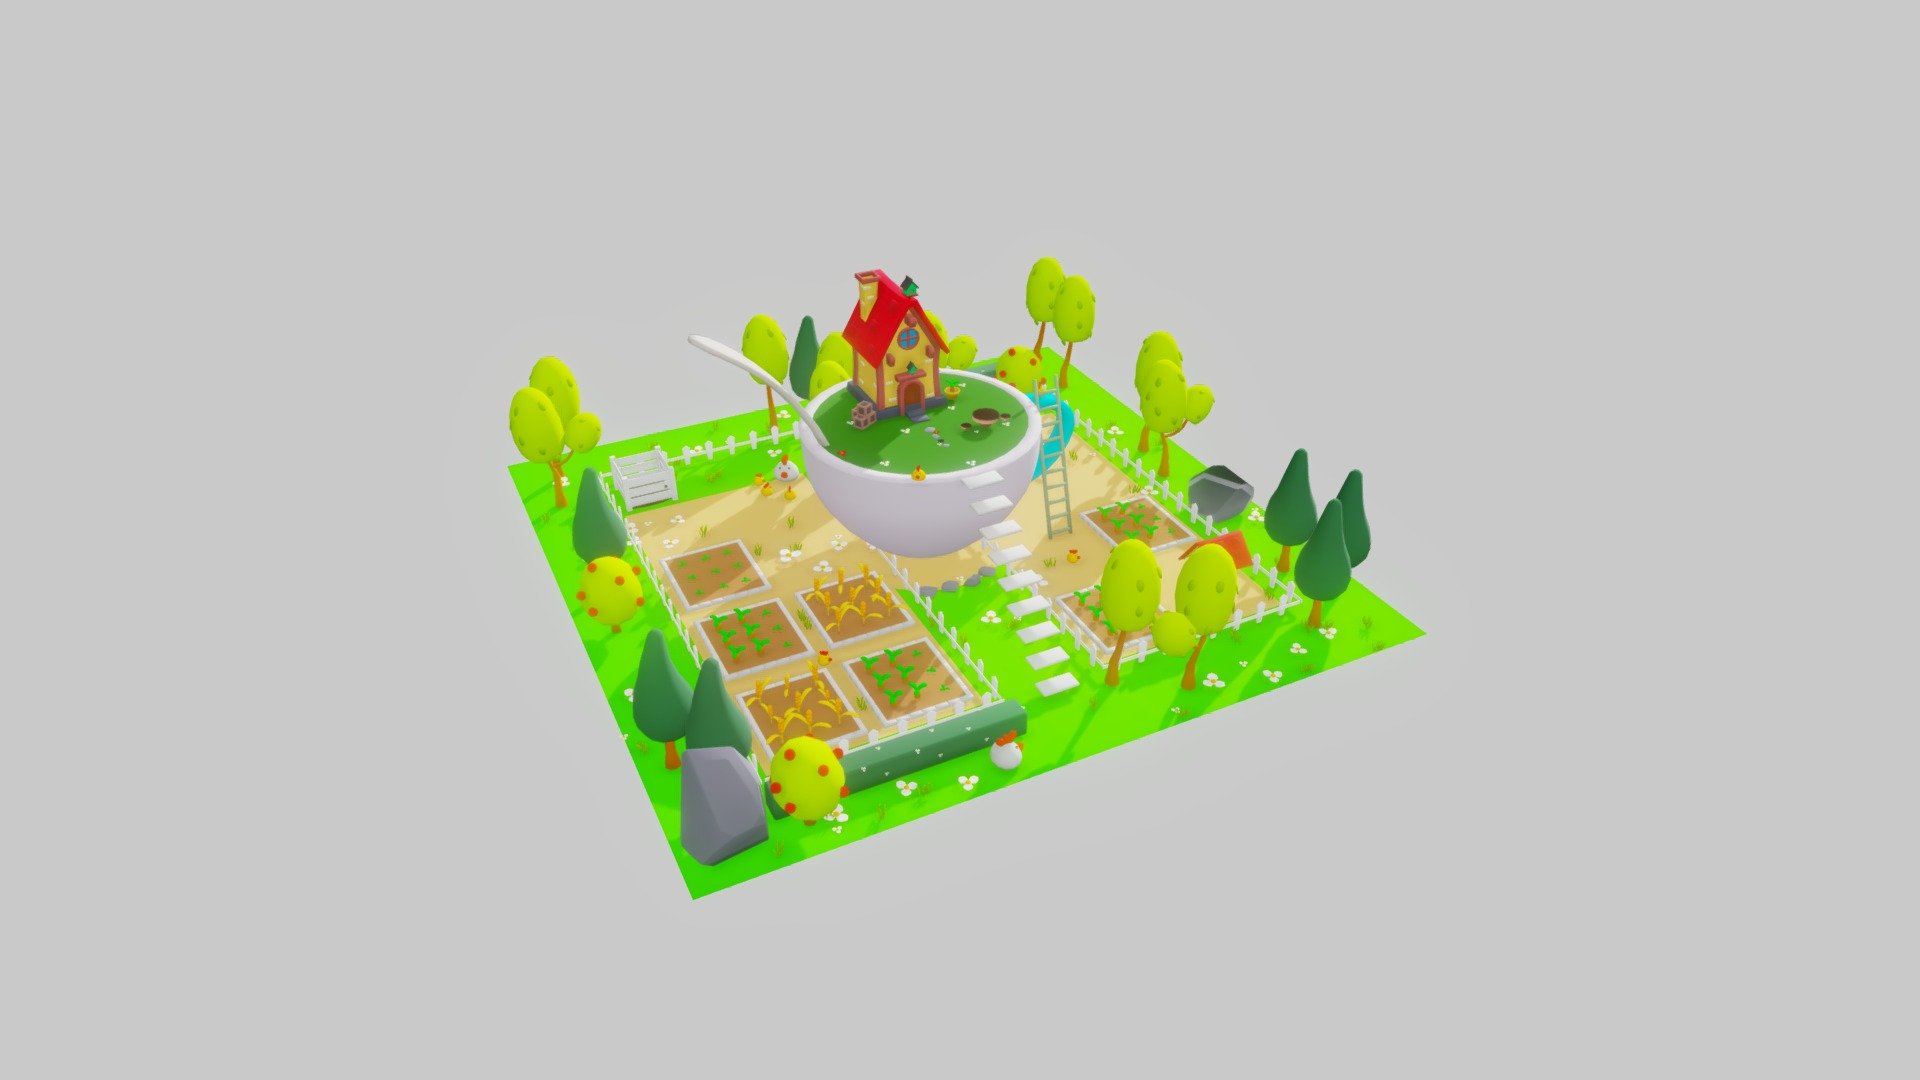 This simple stylized 3D scene is perfect for game developers and project creators looking for a compact, yet visually appealing environment. The scene is set with stylized objects filled with vibrant colors, including grasses, rocks, trees, well, teacup, house and a flock of chickens. The scene features a simple, yet elegant art style, which allows developers to easily customize it to fit the specific needs of their project.  With its compact size and charming aesthetic, this scene is the perfect starting point for a variety of game development projects.

Get more models here
https://voxelcubes.com

Keep up-to-date with our releases
https://www.youtube.com/@voxelcubesstudios

Check out our renders
https://www.artstation.com/voxelcubes - Teacup House - Download Free 3D model by Voxelcubes Studios (@voxelcubes) 3d model